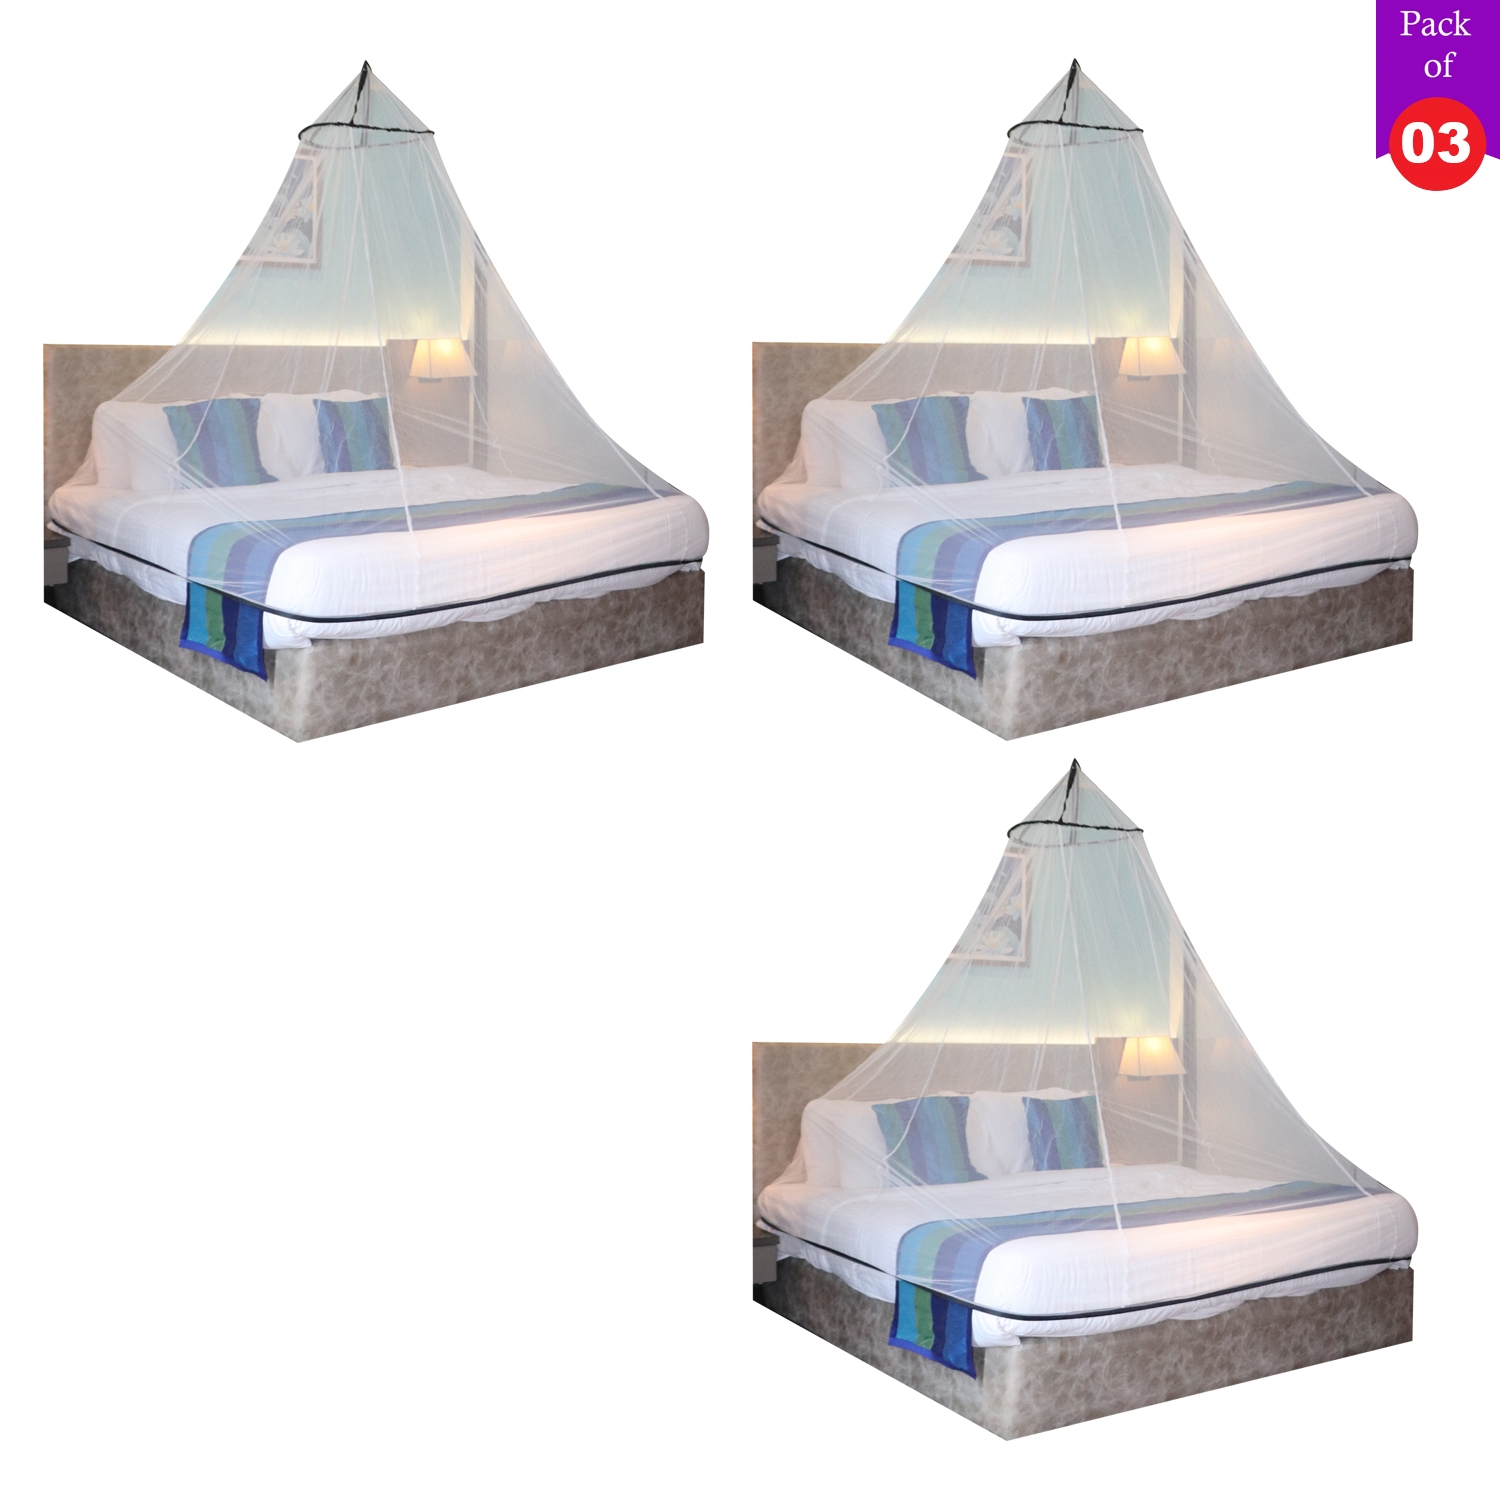 Mosquito Net for Double Bed, King-Size, Round Ceiling Hanging Foldable Polyester Net White And Black Pack 3 